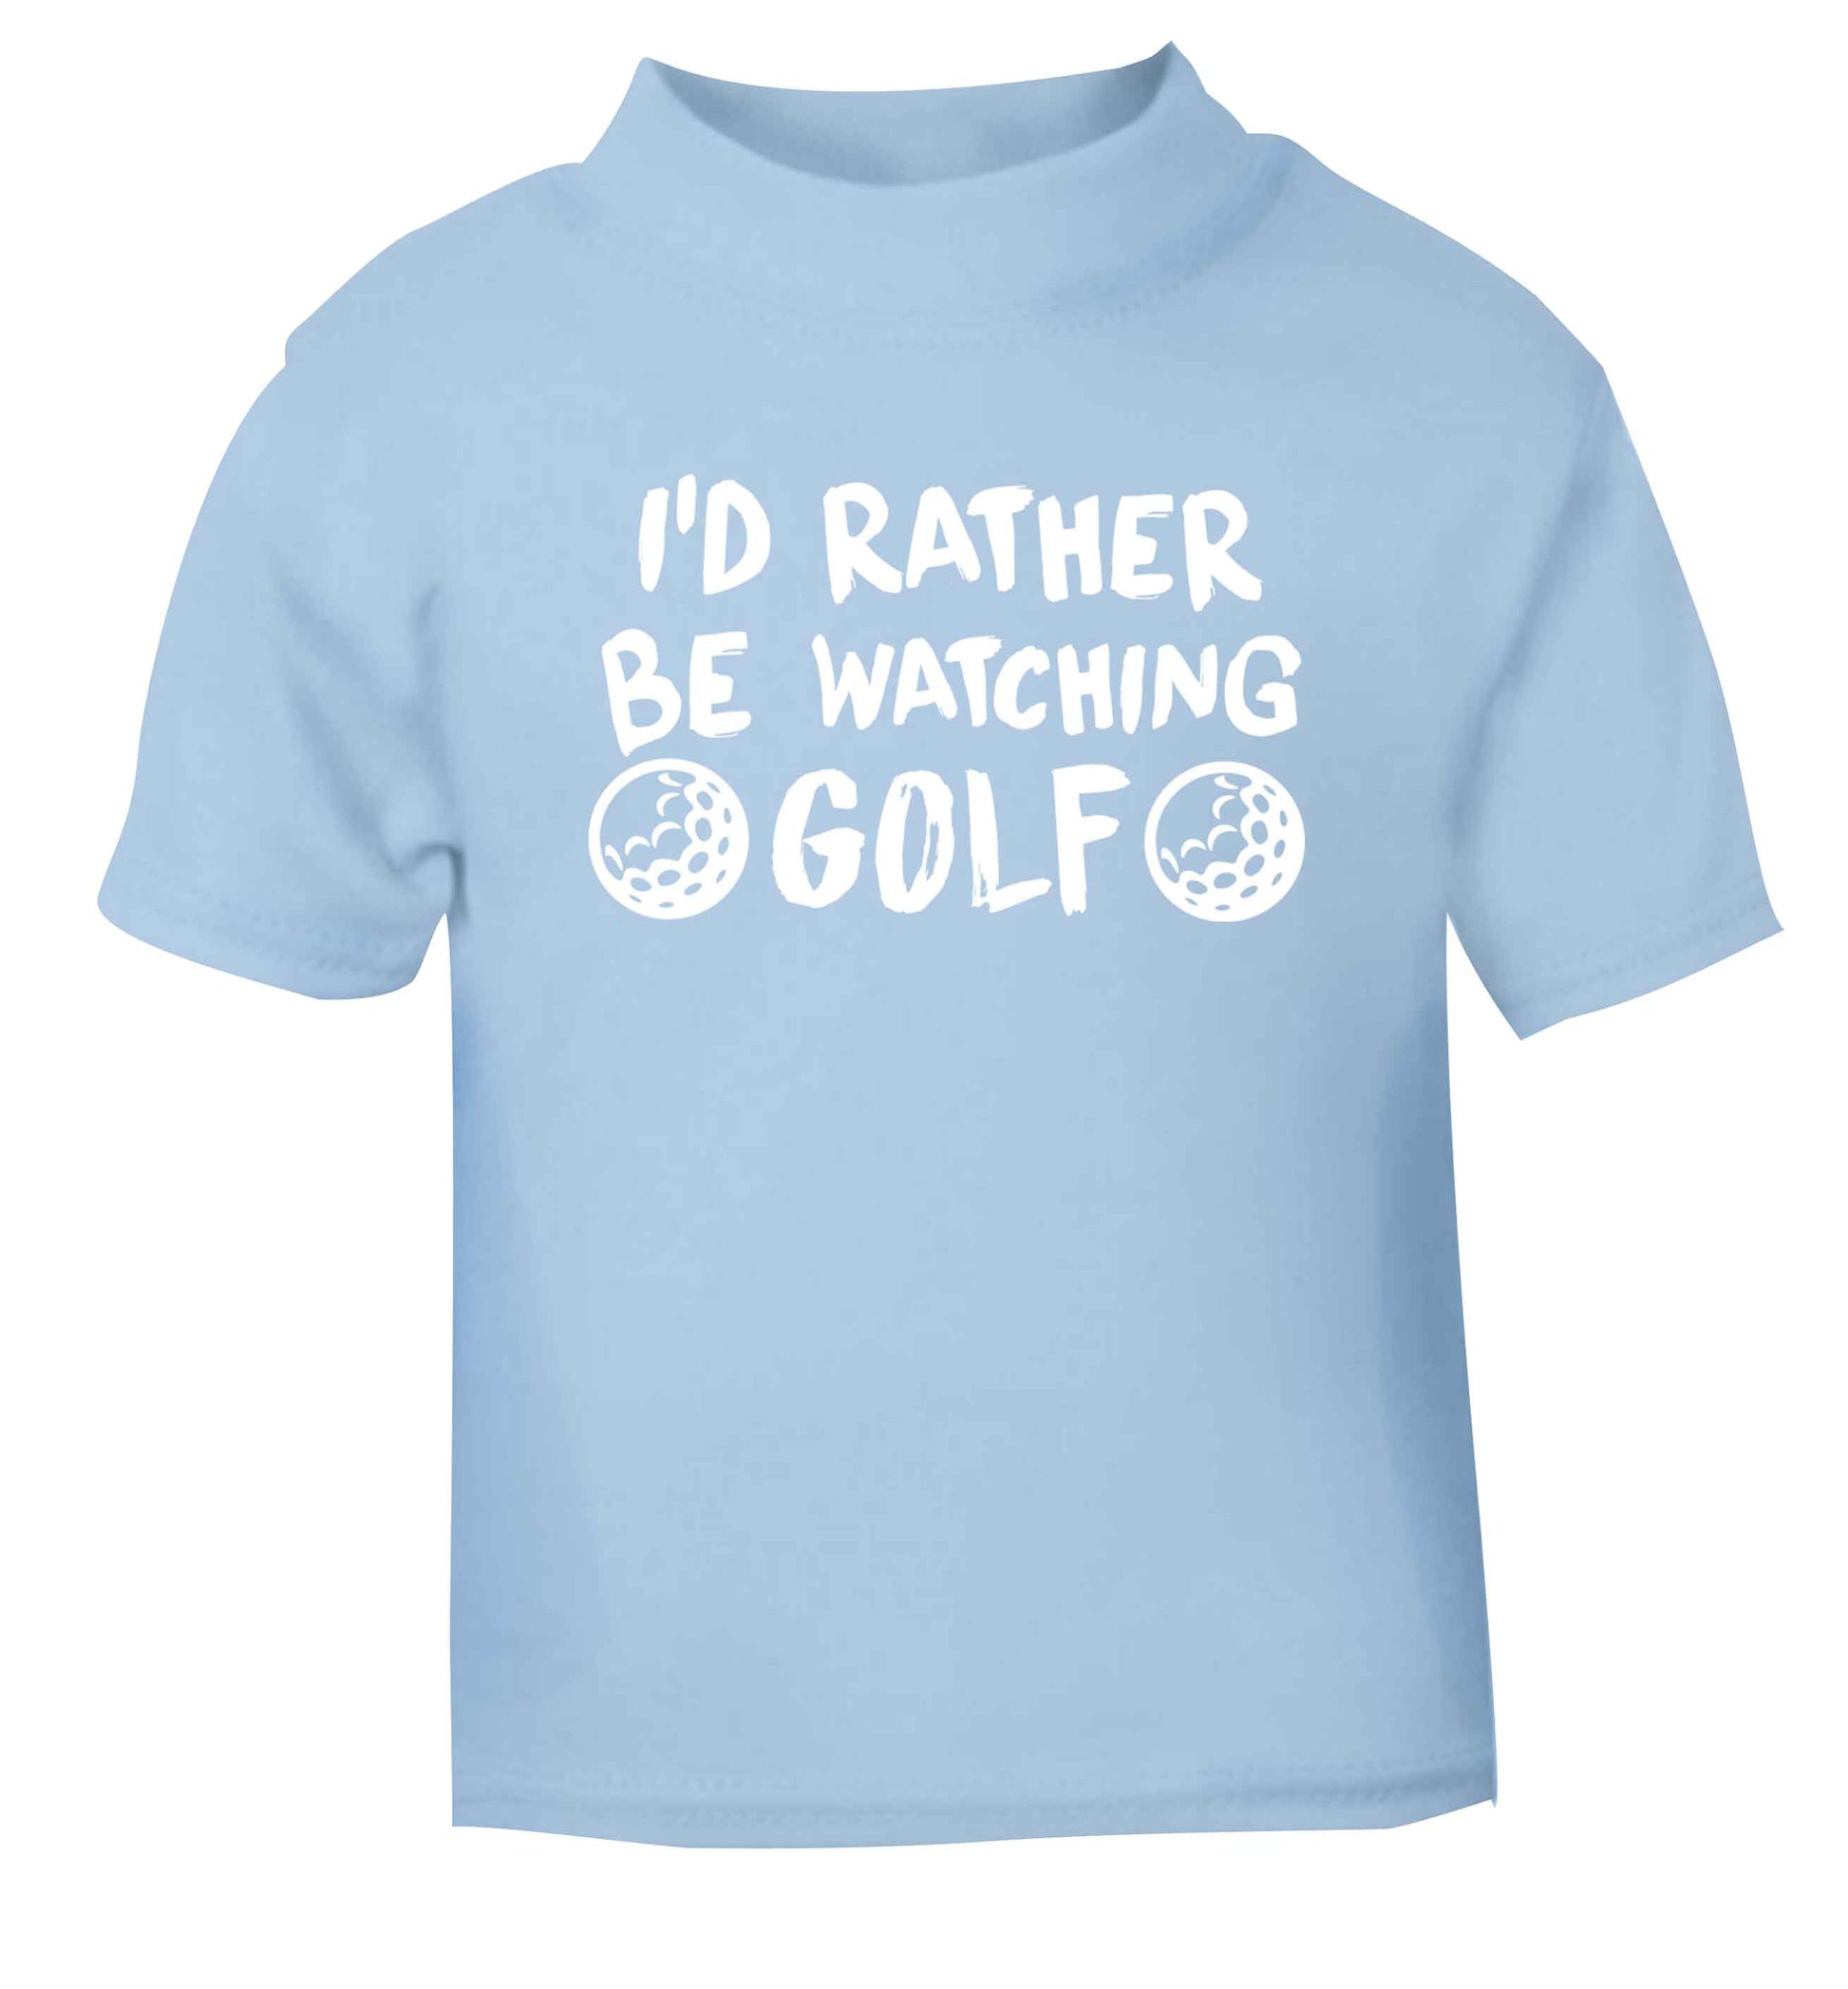 I'd rather be watching golf light blue Baby Toddler Tshirt 2 Years